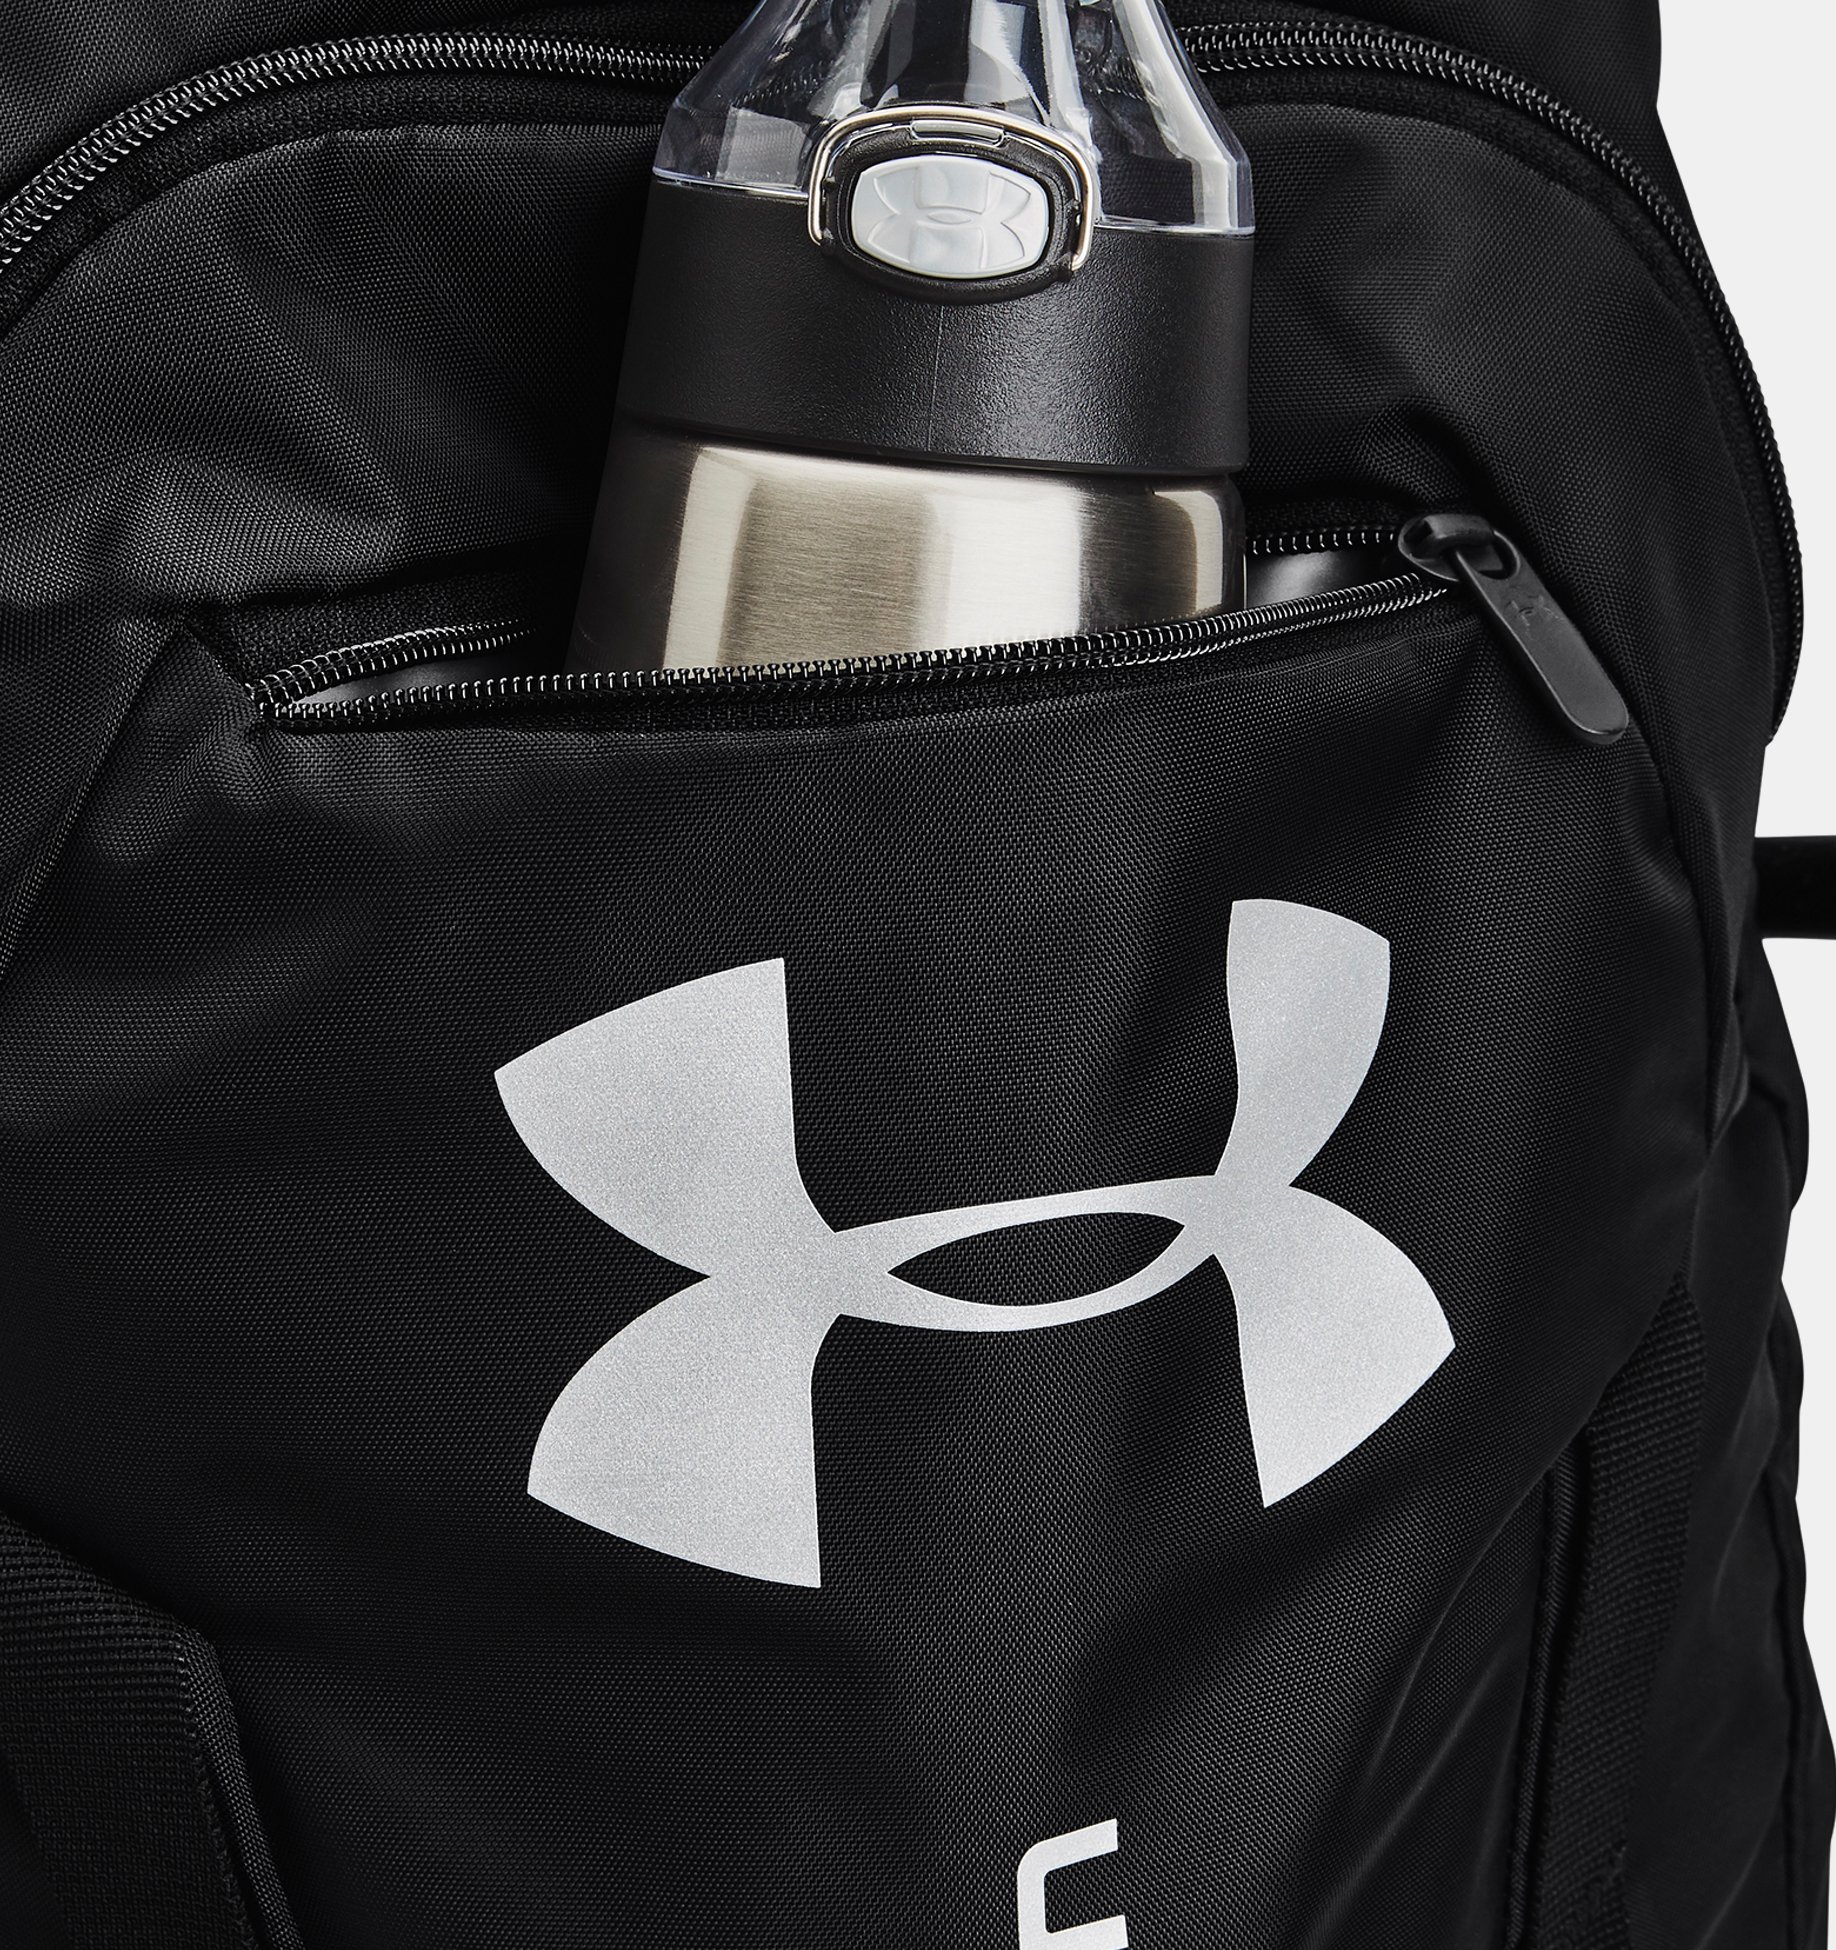 Under Armour UA Undeniable Sackpack Drawstring Backpack 1369220